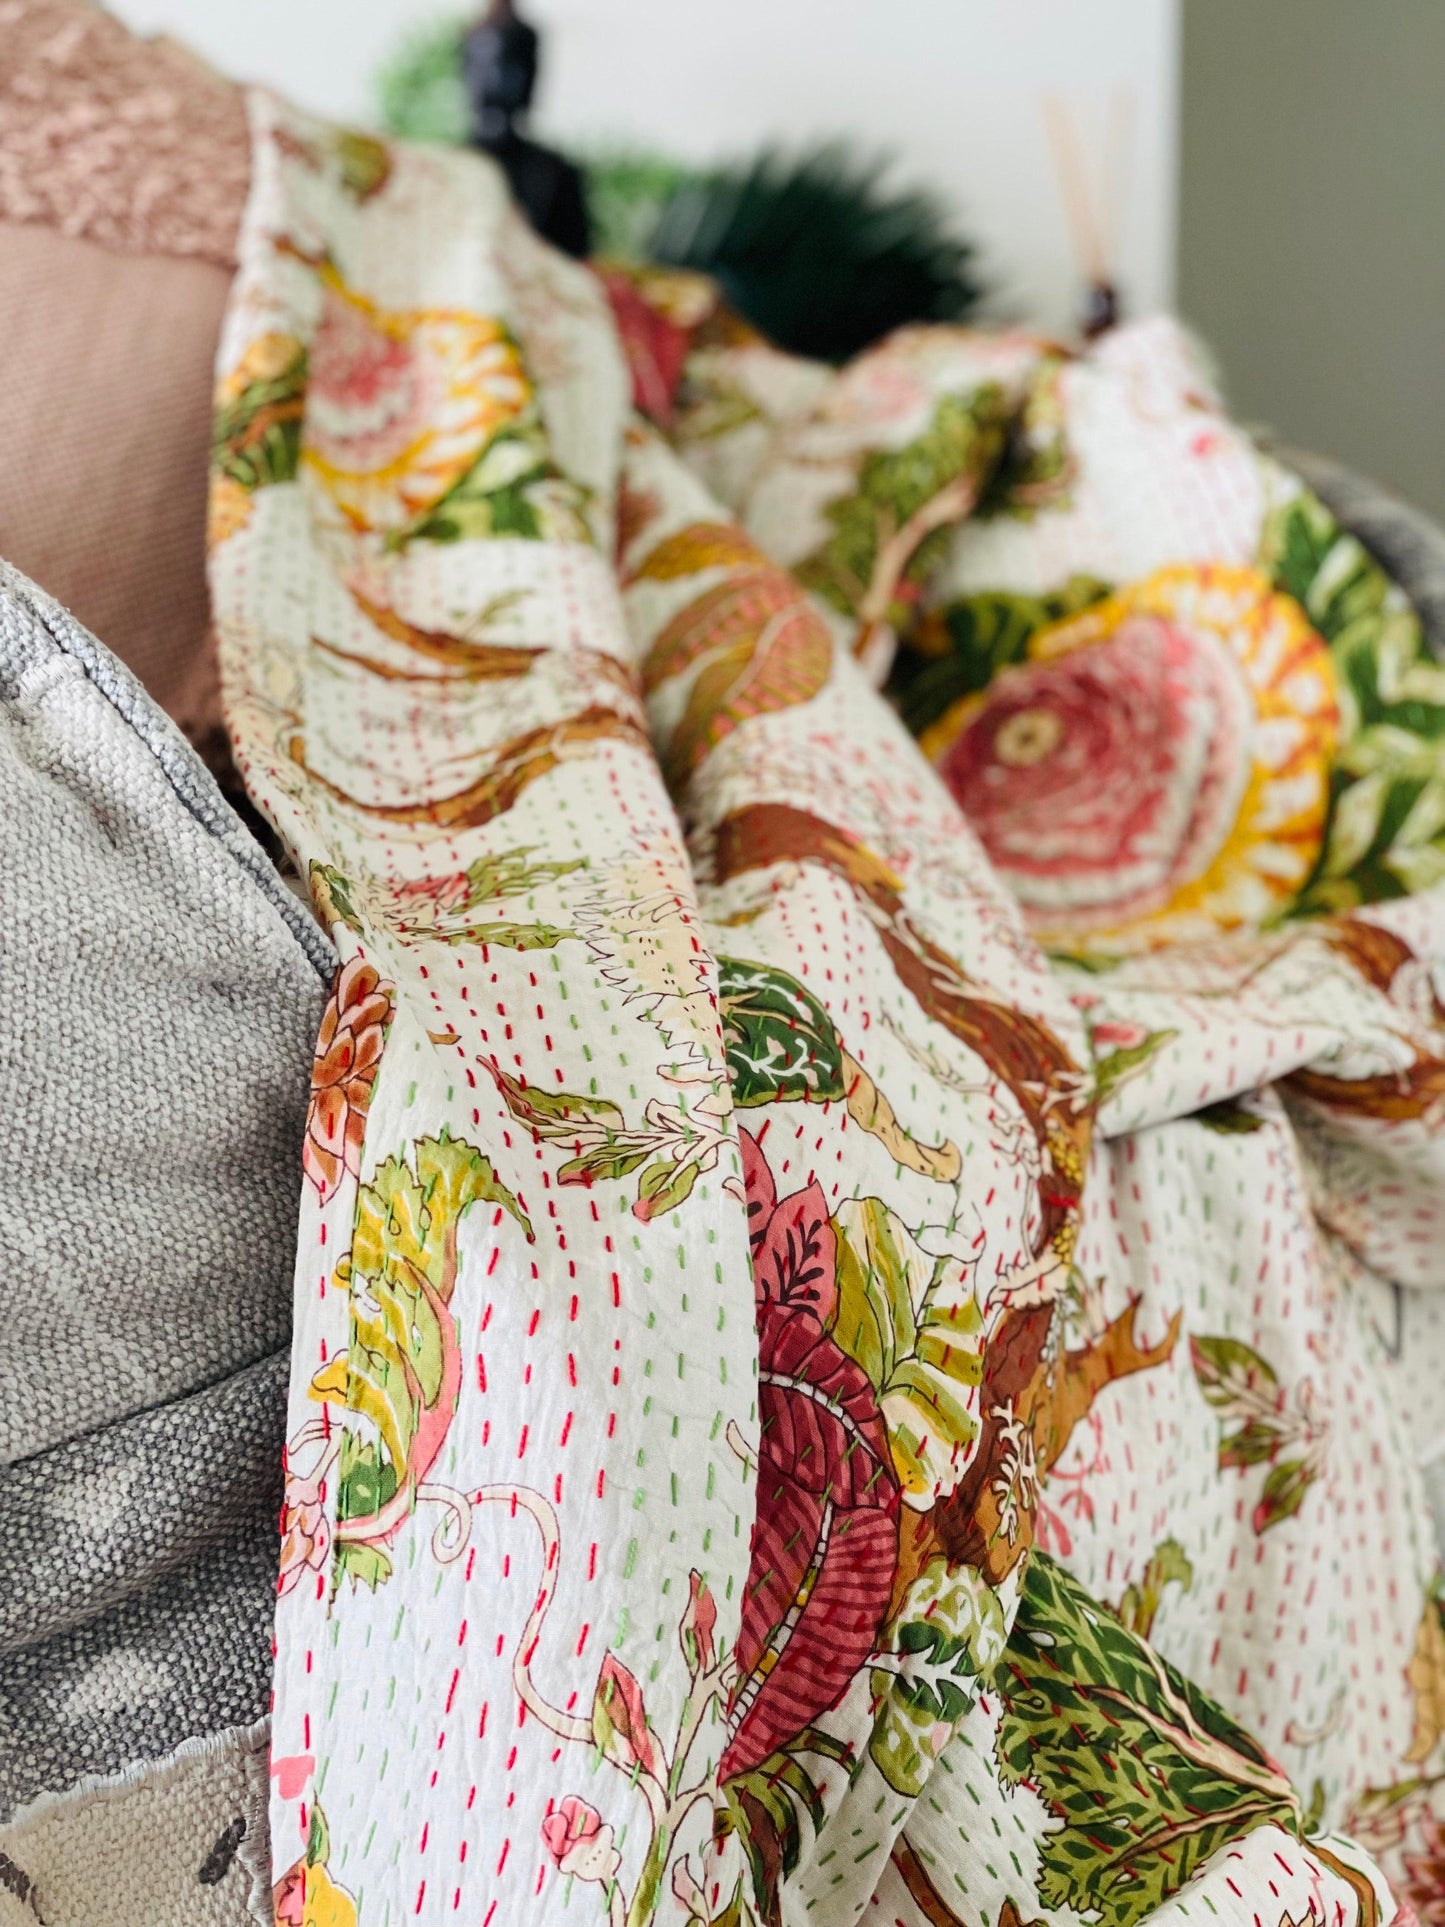 Floral Cotton Kantha Quilt: Artisan Crafted Bedspread & Blanket - Rooii by Tuvisha